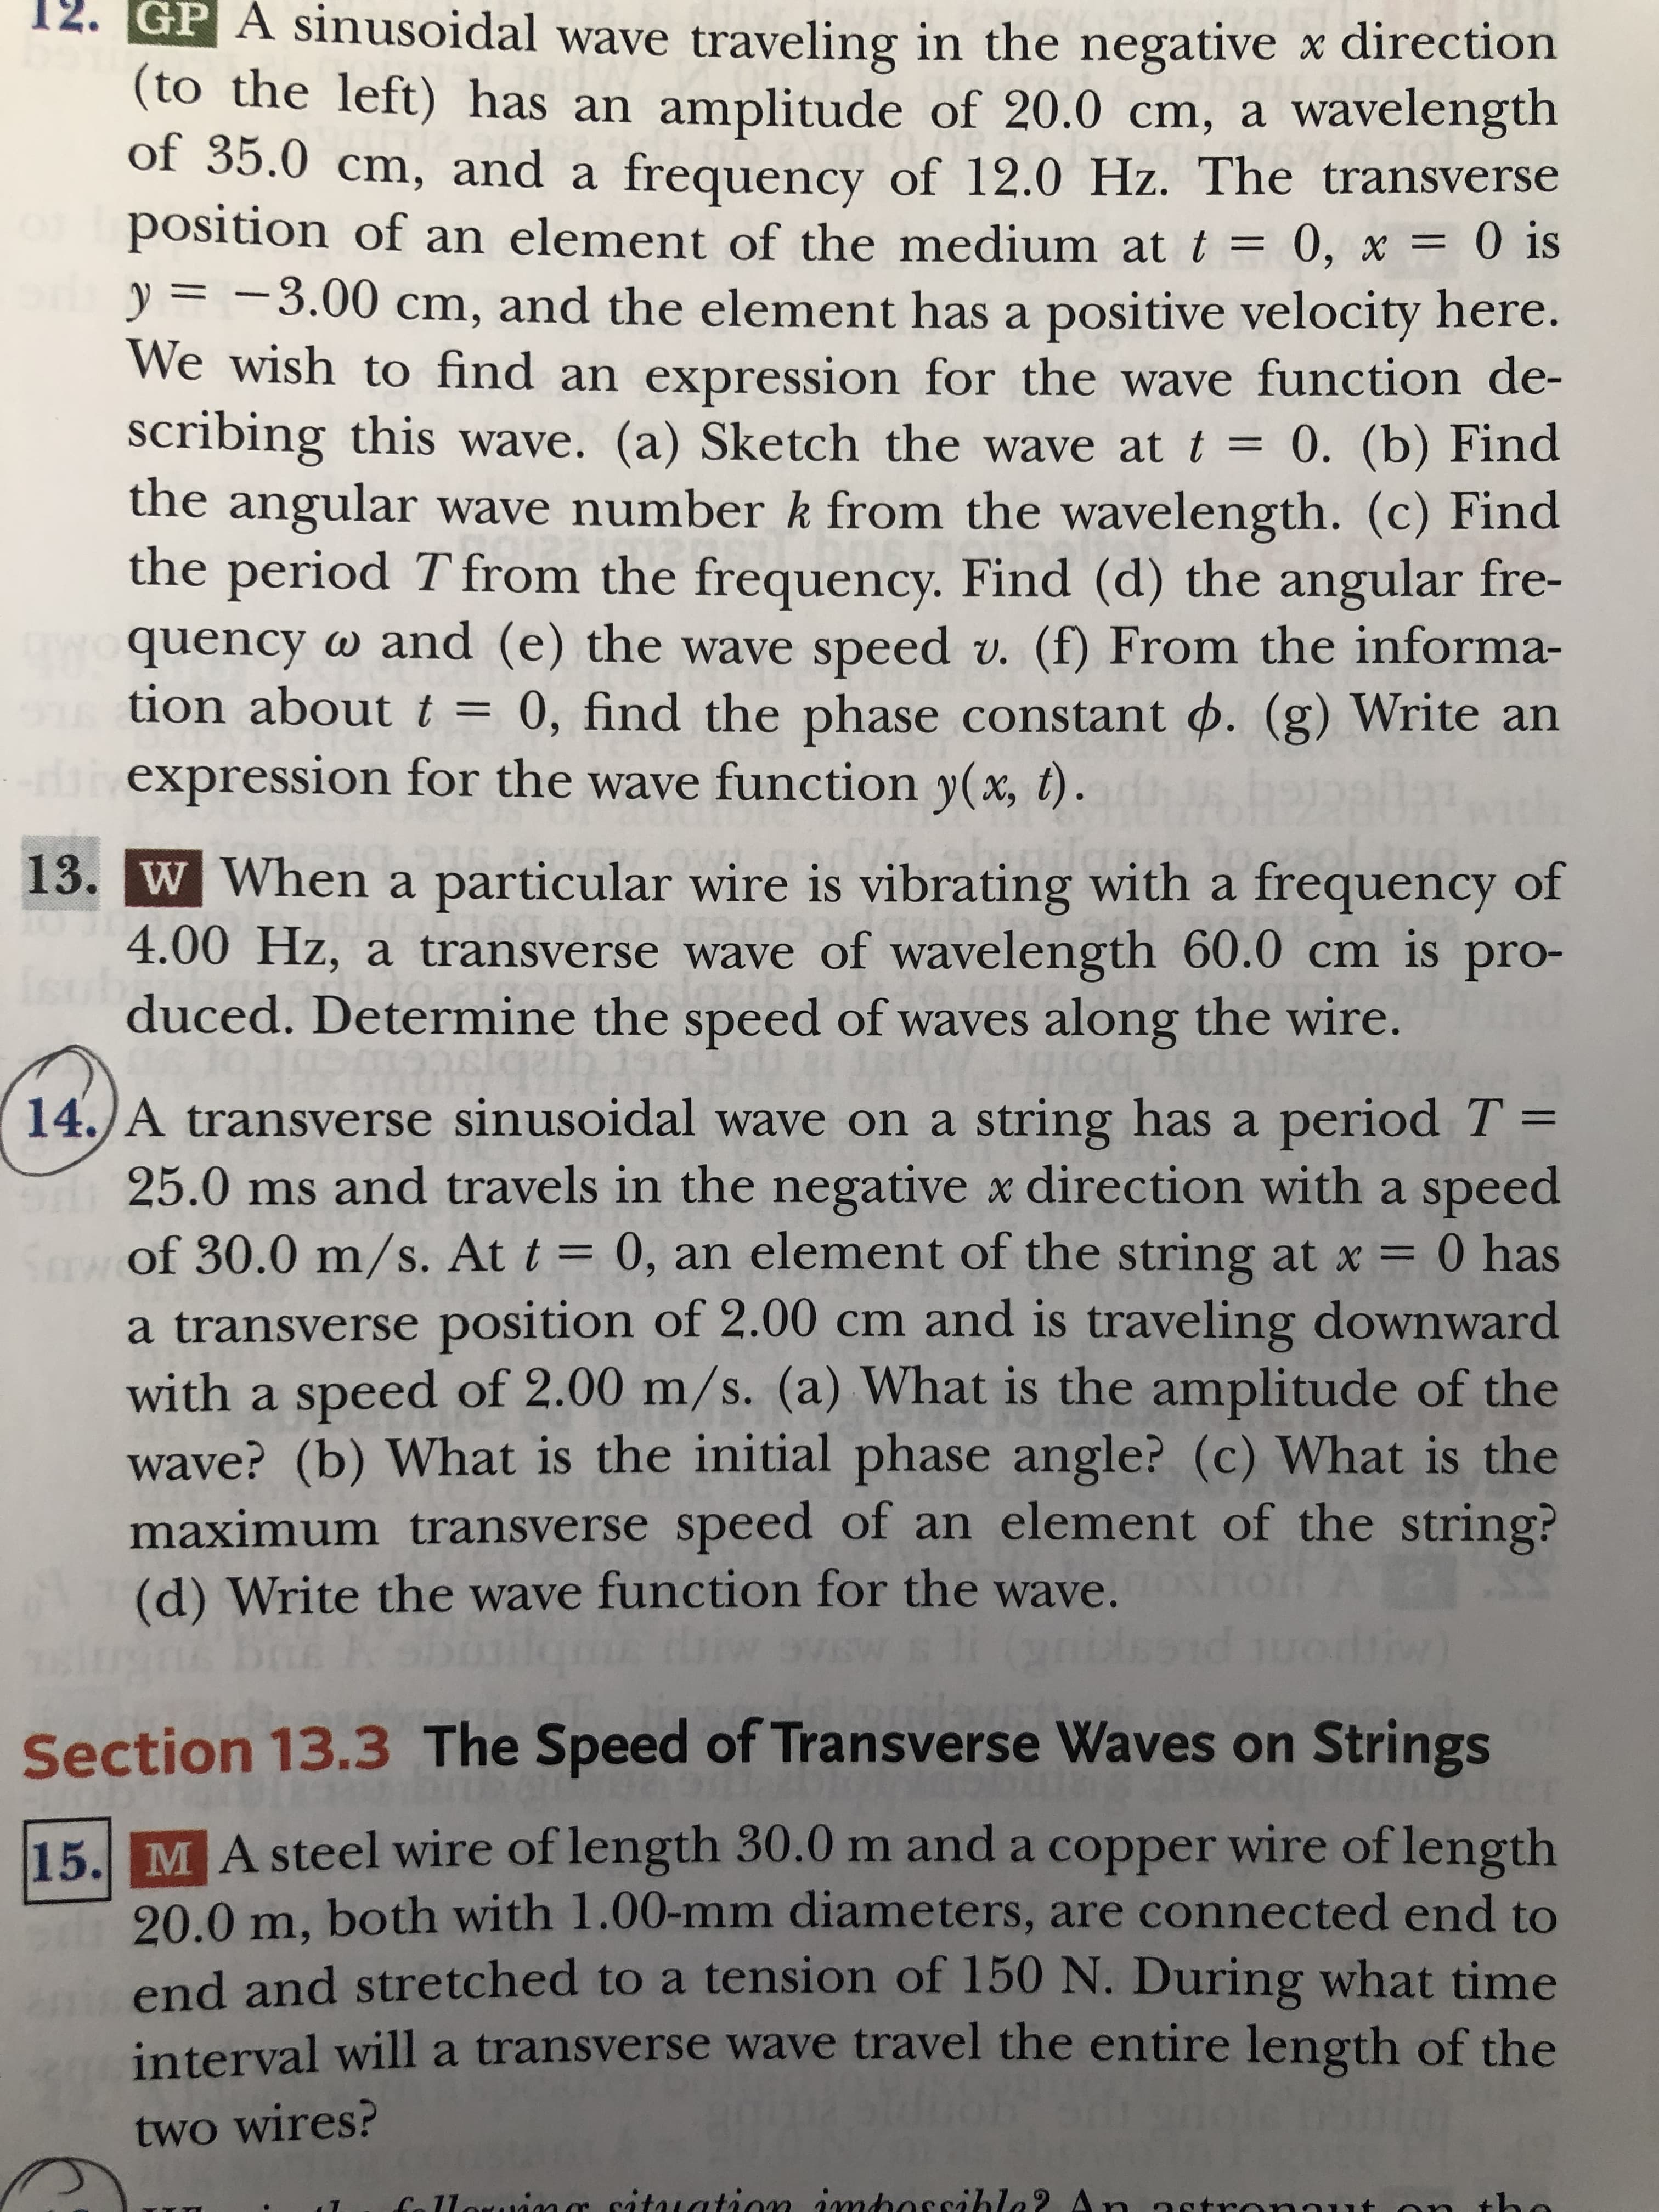 A transverse sinusoidal wave on a string has a period T =
25.0 ms and travels in the negative x direction with a speed
of 30.0 m/s. At t = 0, an element of the string at x = 0 has
%3D
%3D
a transverse position of 2.00 cm and is traveling downward
with a speed of 2.00 m/s. (a) What is the amplitude of the
wave? (b) What is the initial phase angle? (c) What is the
maximum transverse speed of an element of the string?
